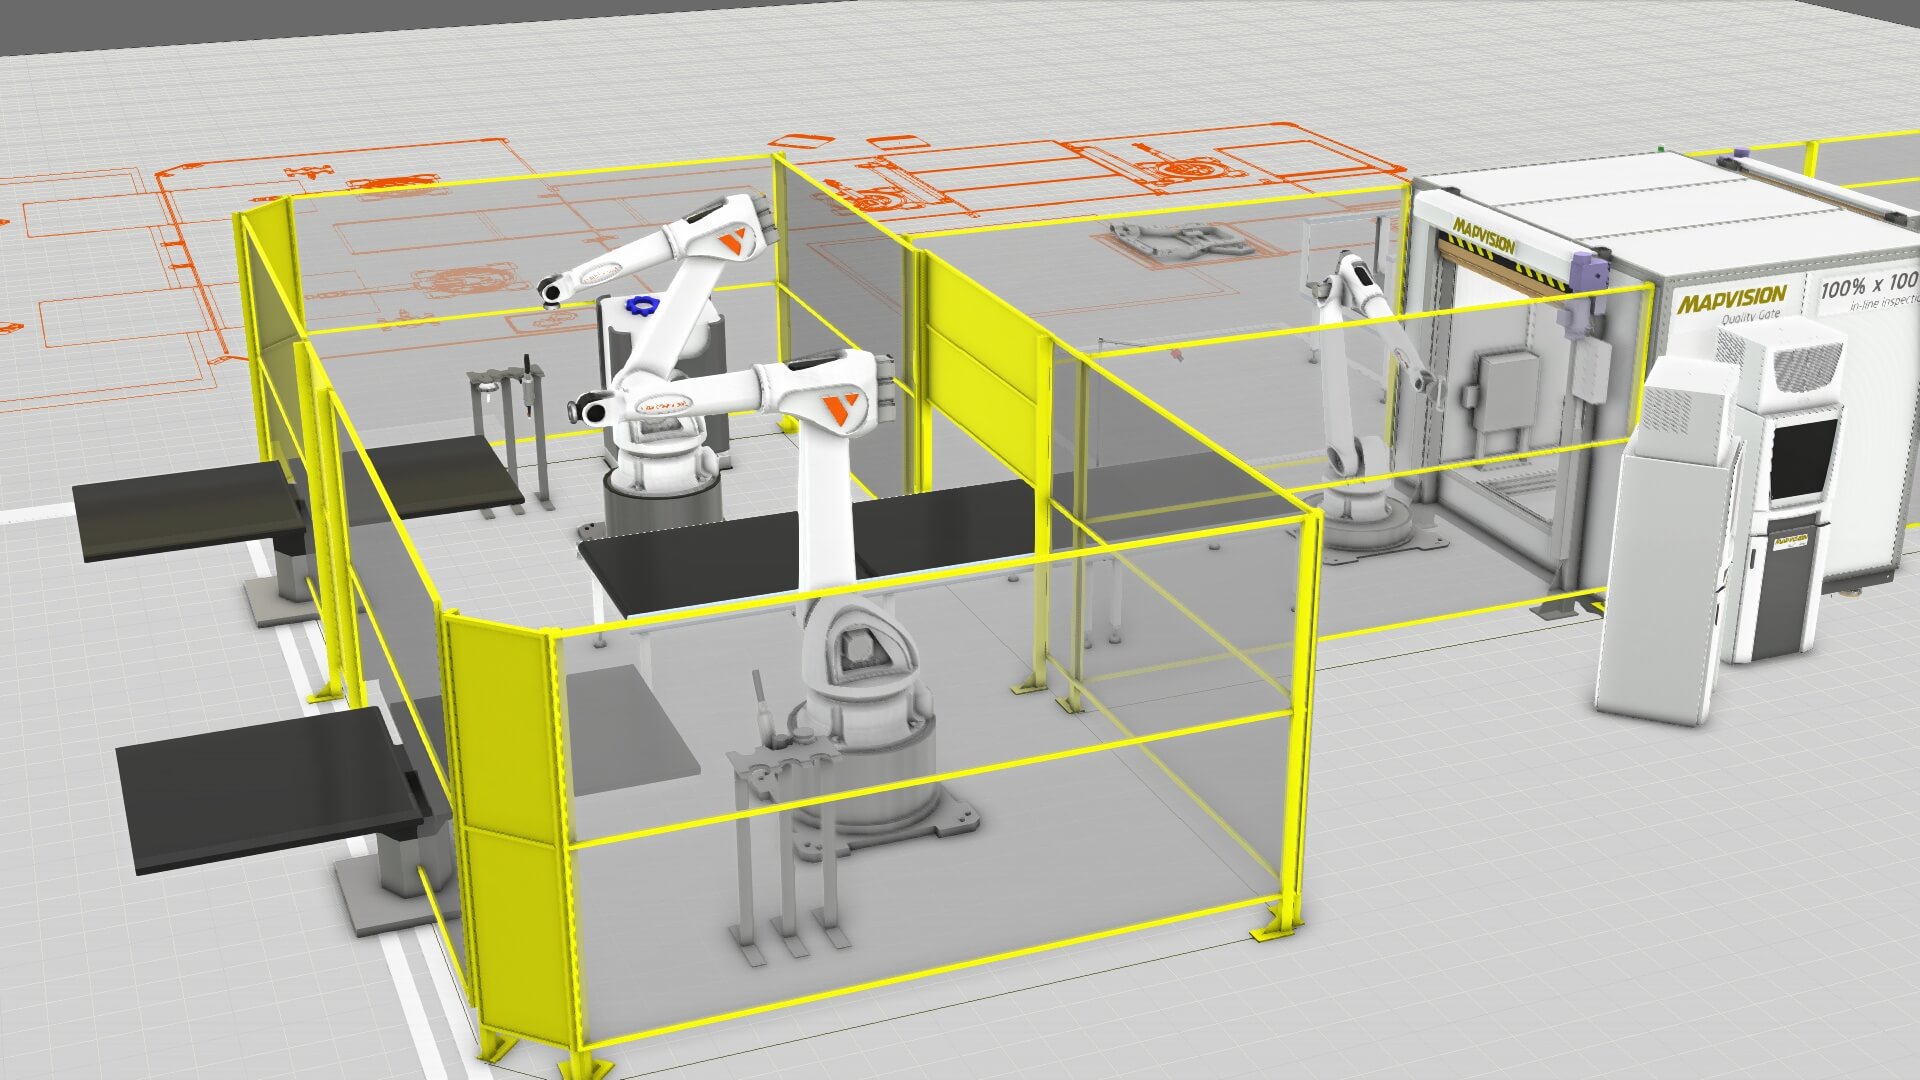 Plant and manufacturing simulation with robots welding